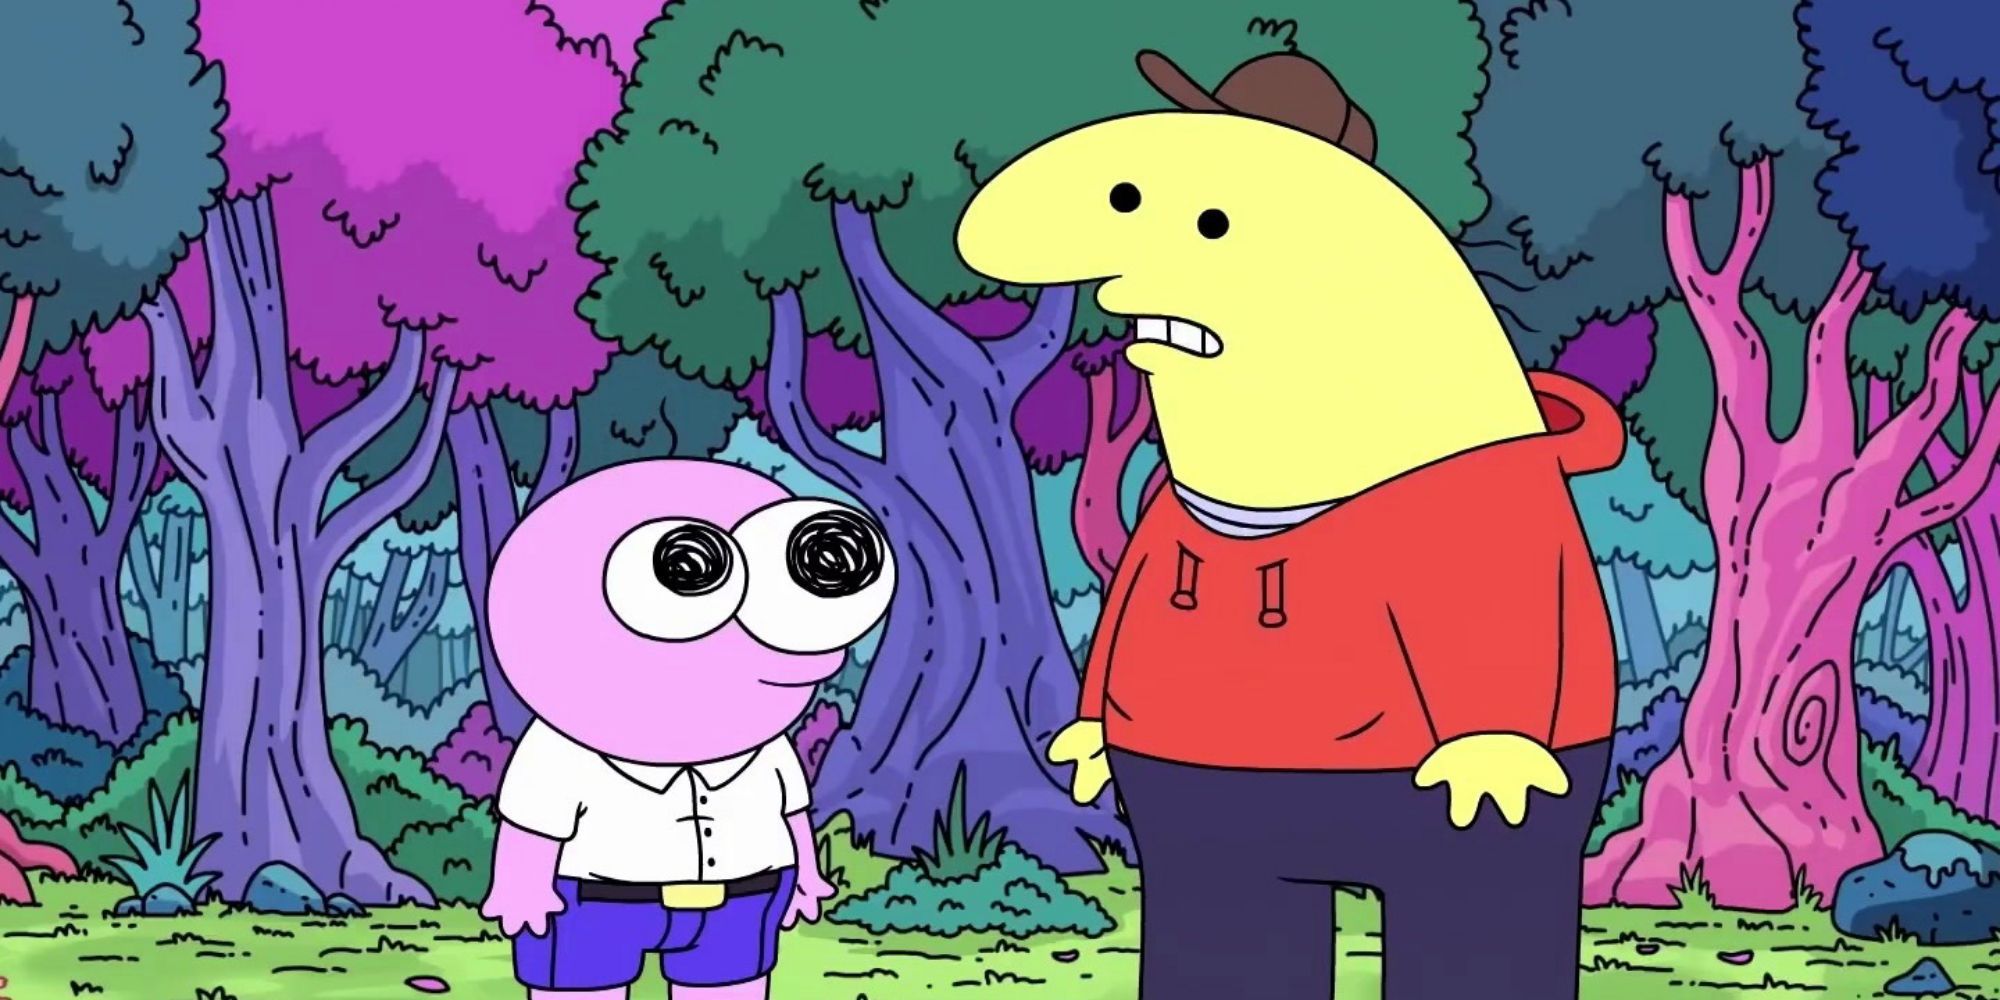 Pim and Charlie stand in the forest in 'Smiling Friends'.